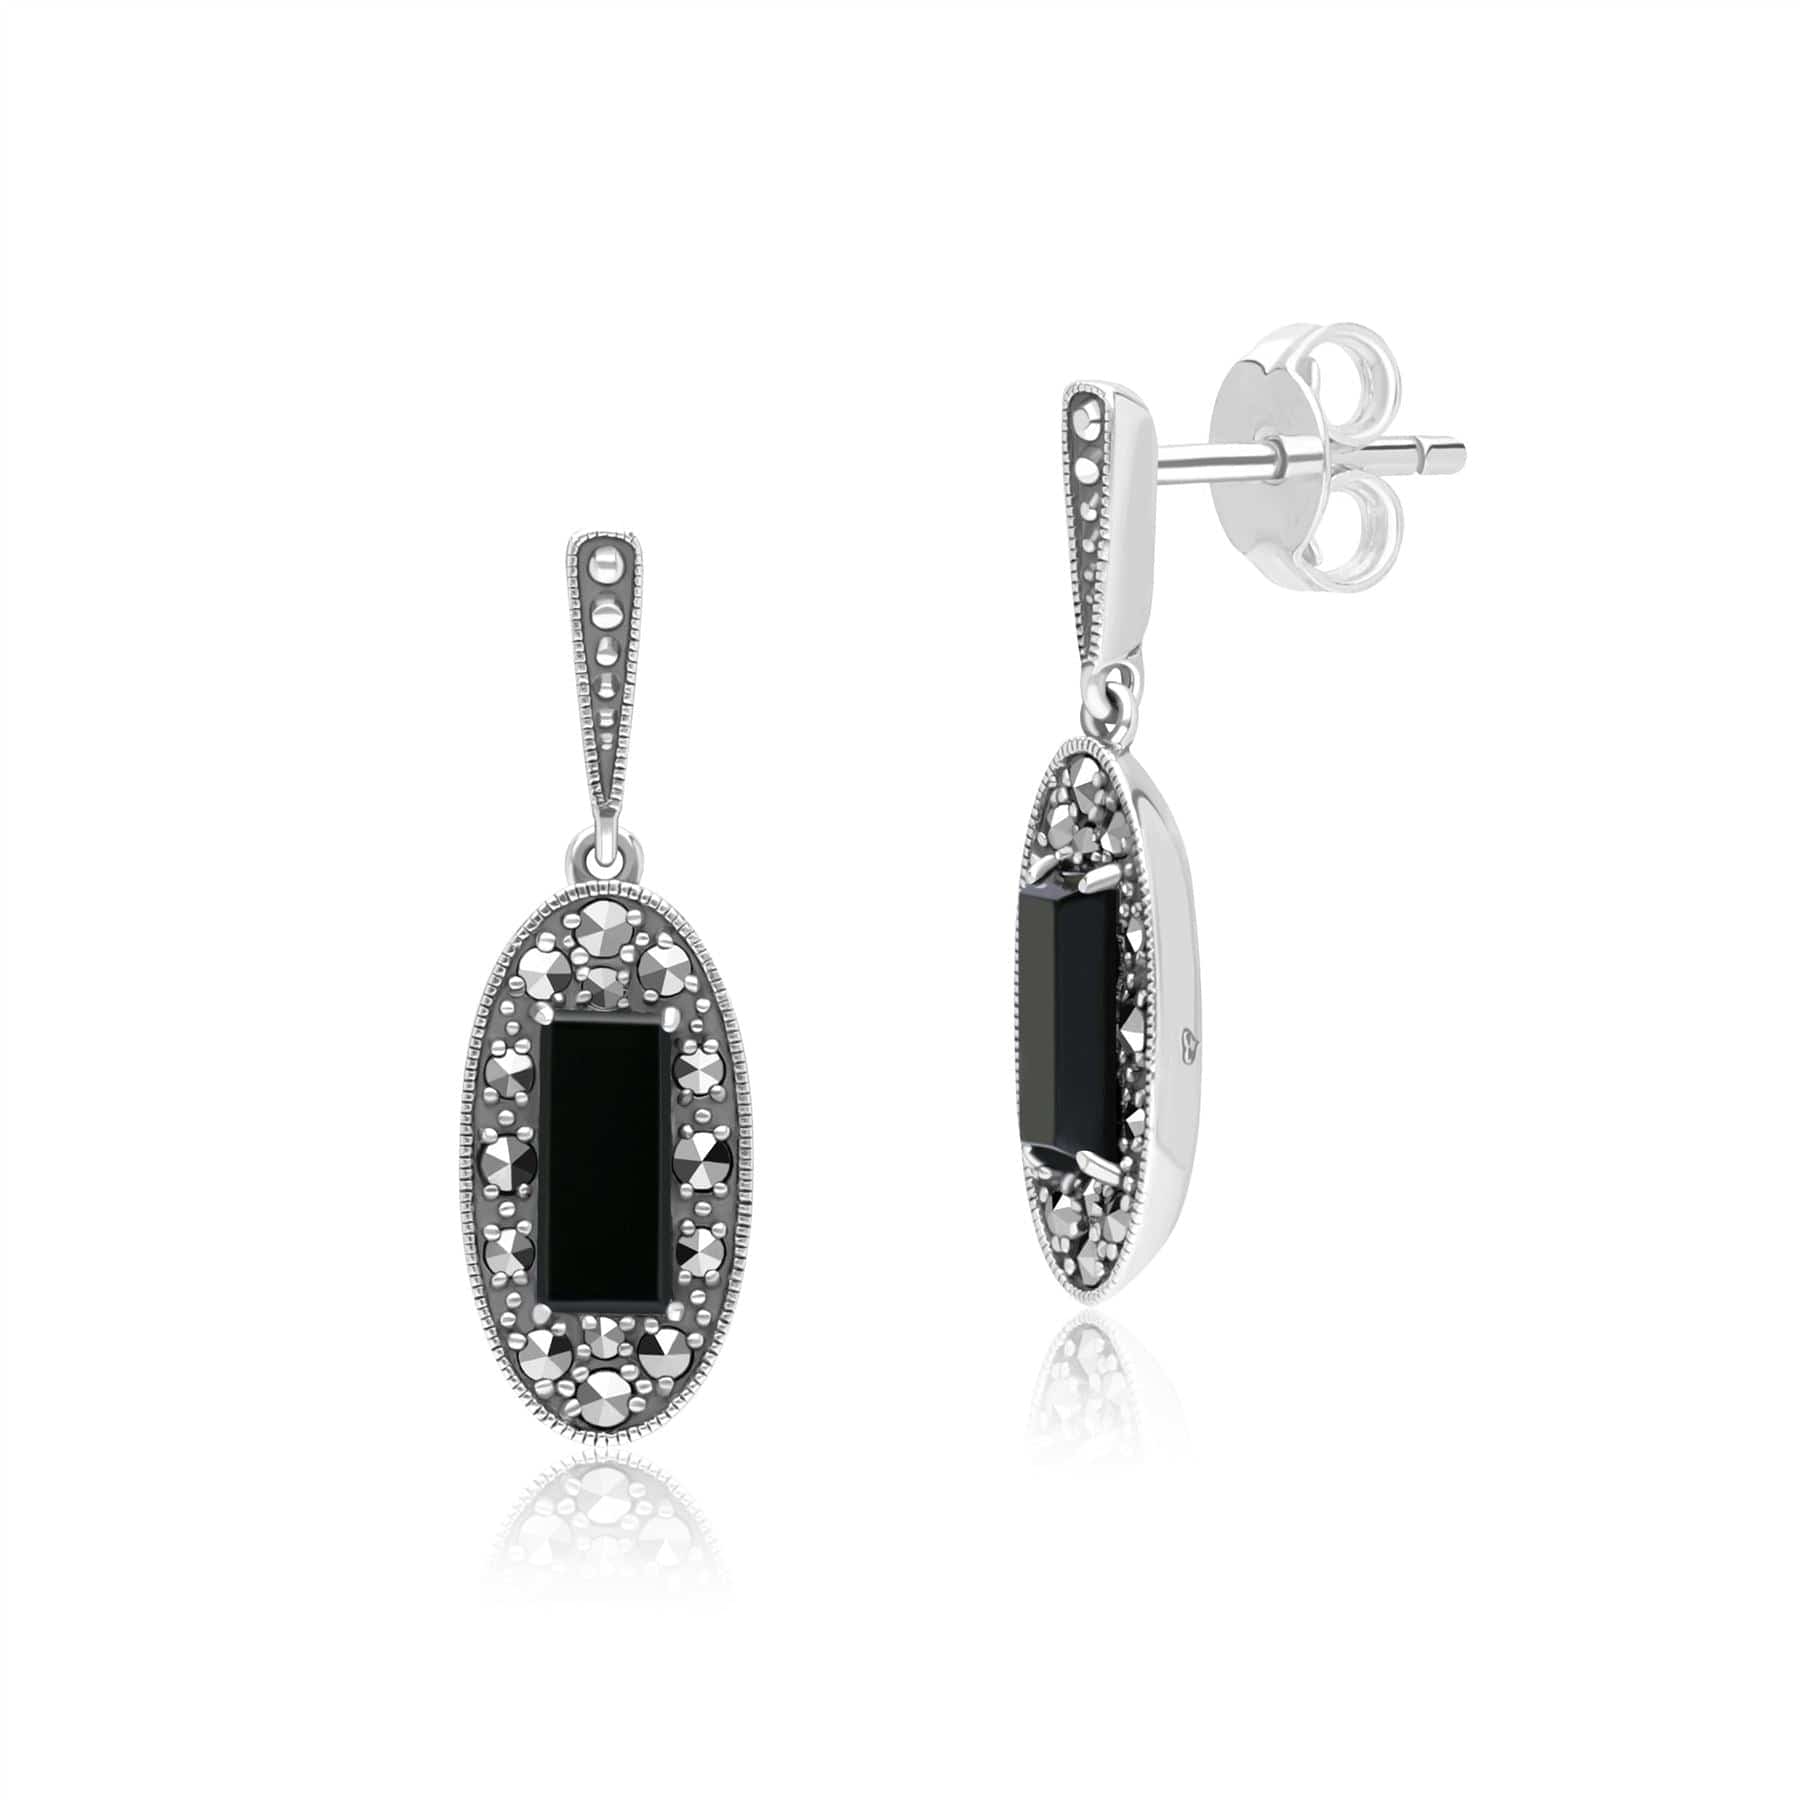 Art Deco Style Oval Onyx and Marcasite Drop Earrings in Sterling Silver 214E936302925 